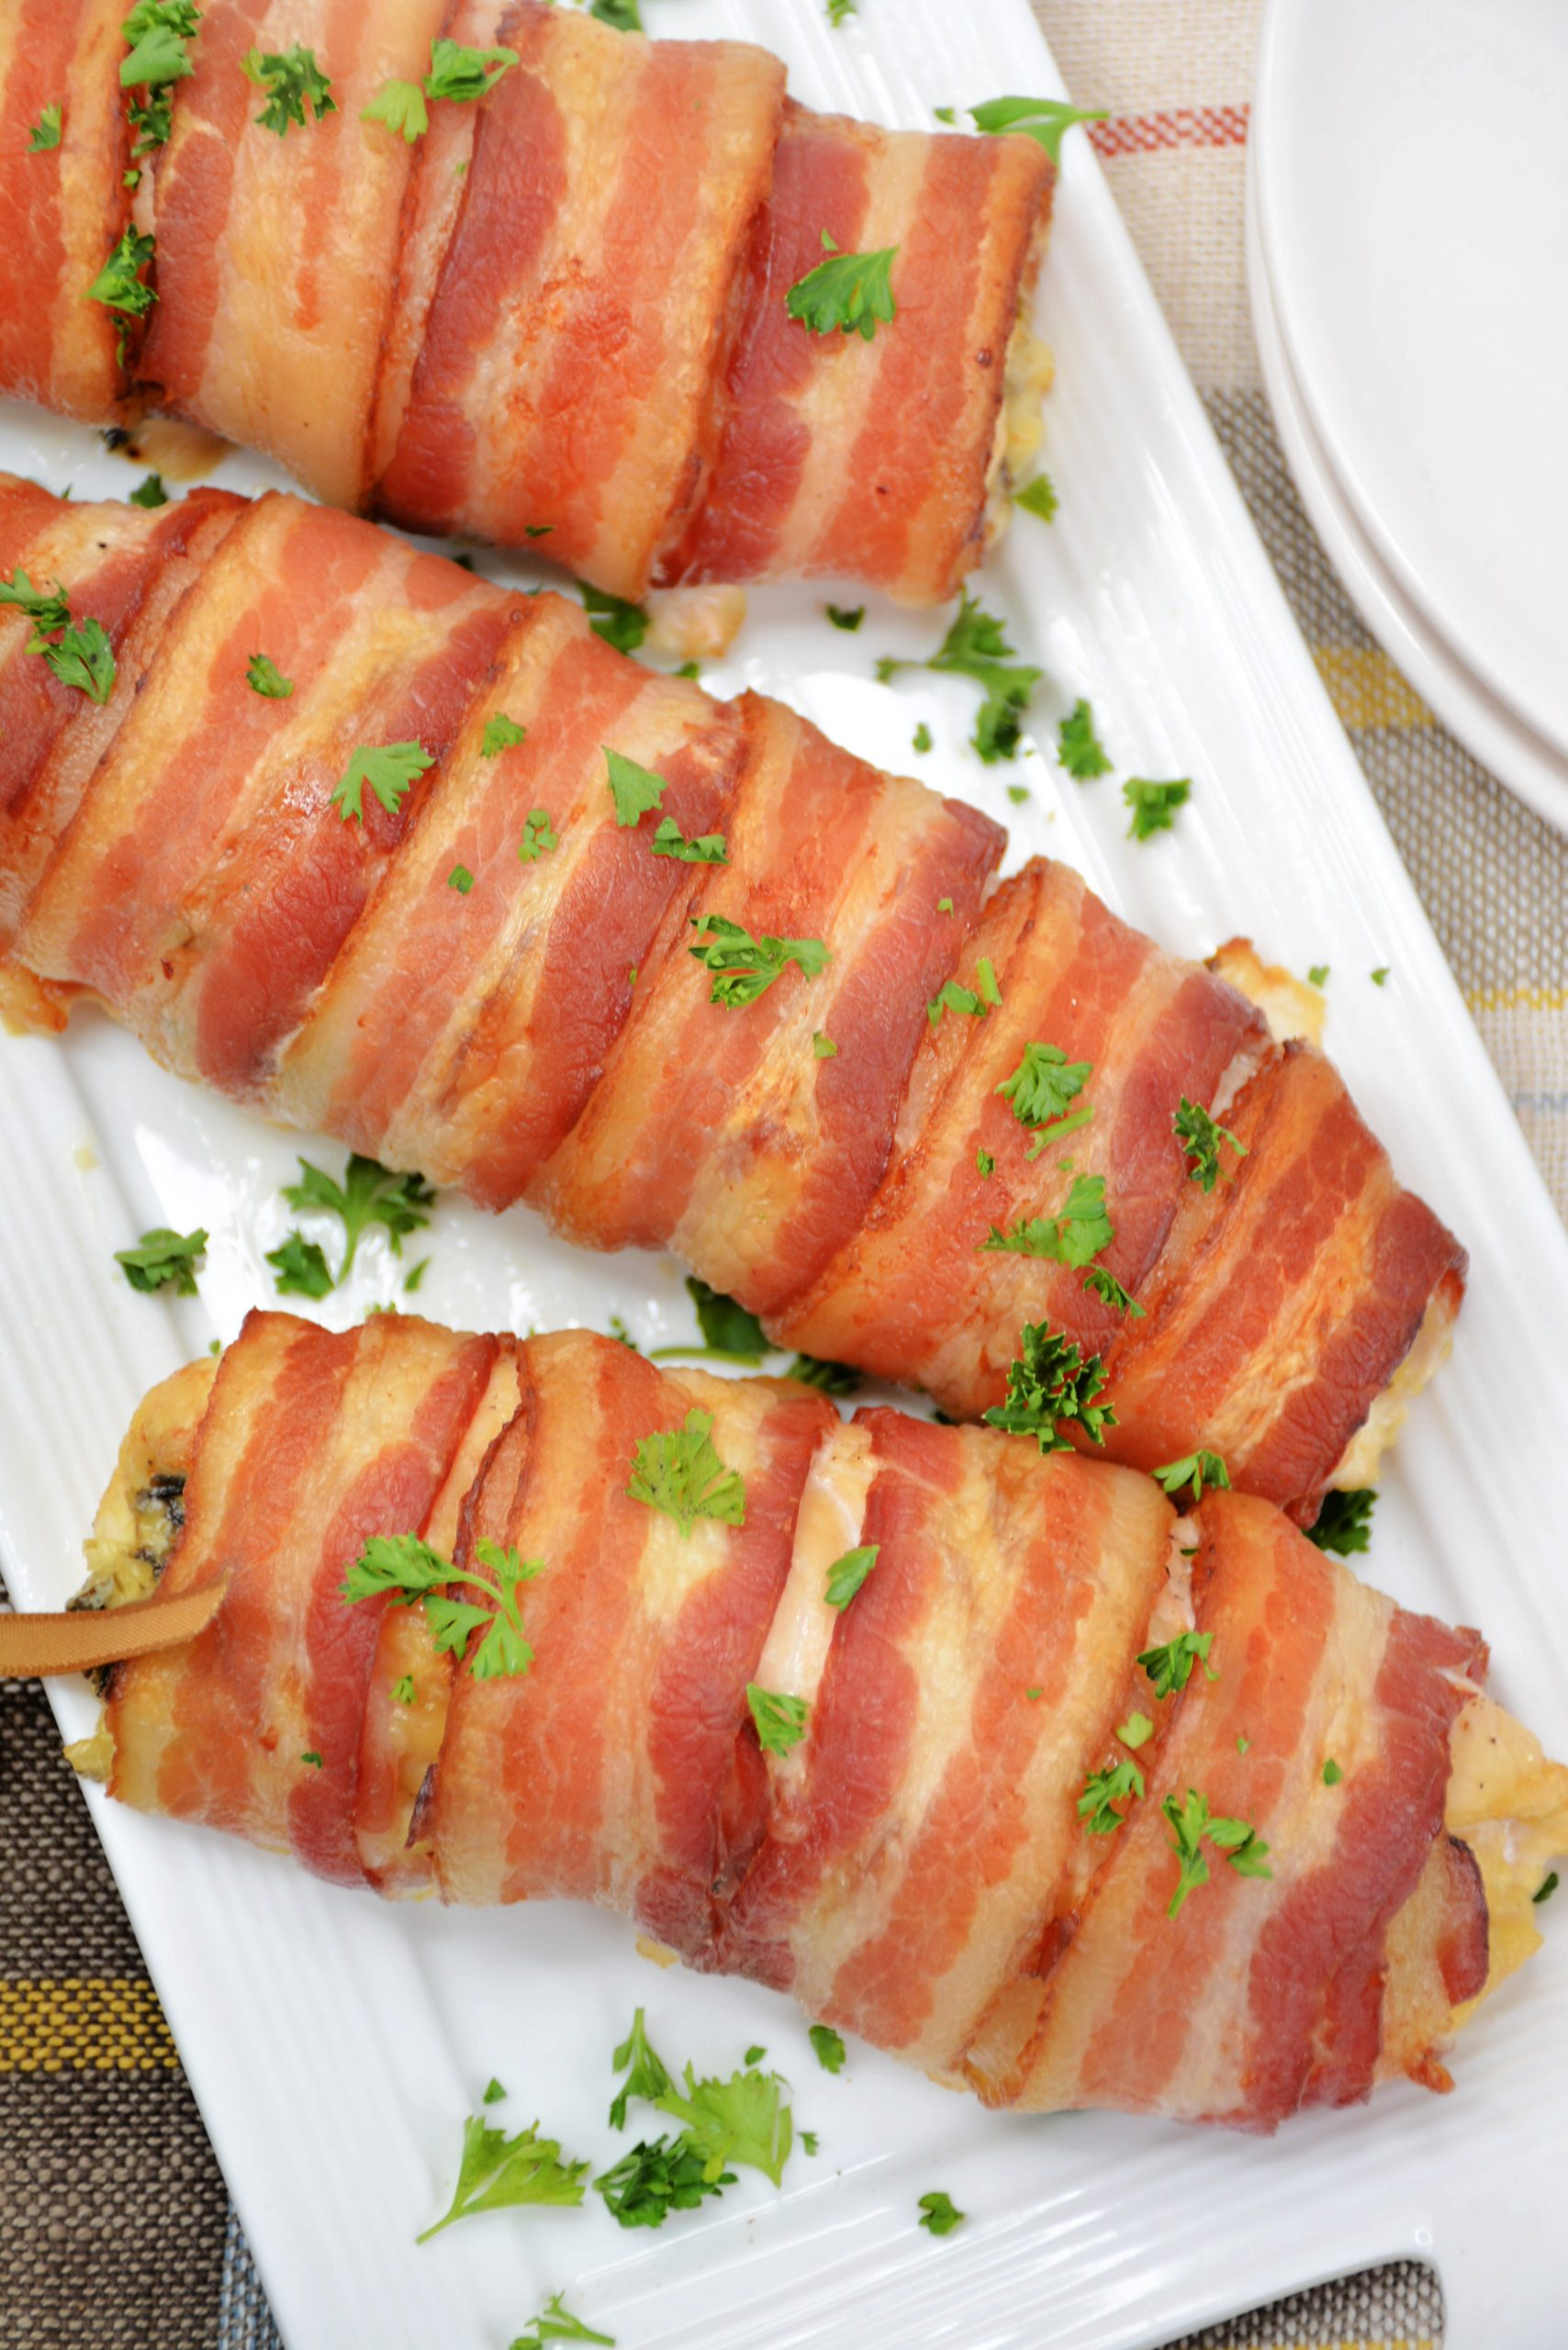 Bacon wrapped stuffed chicken 